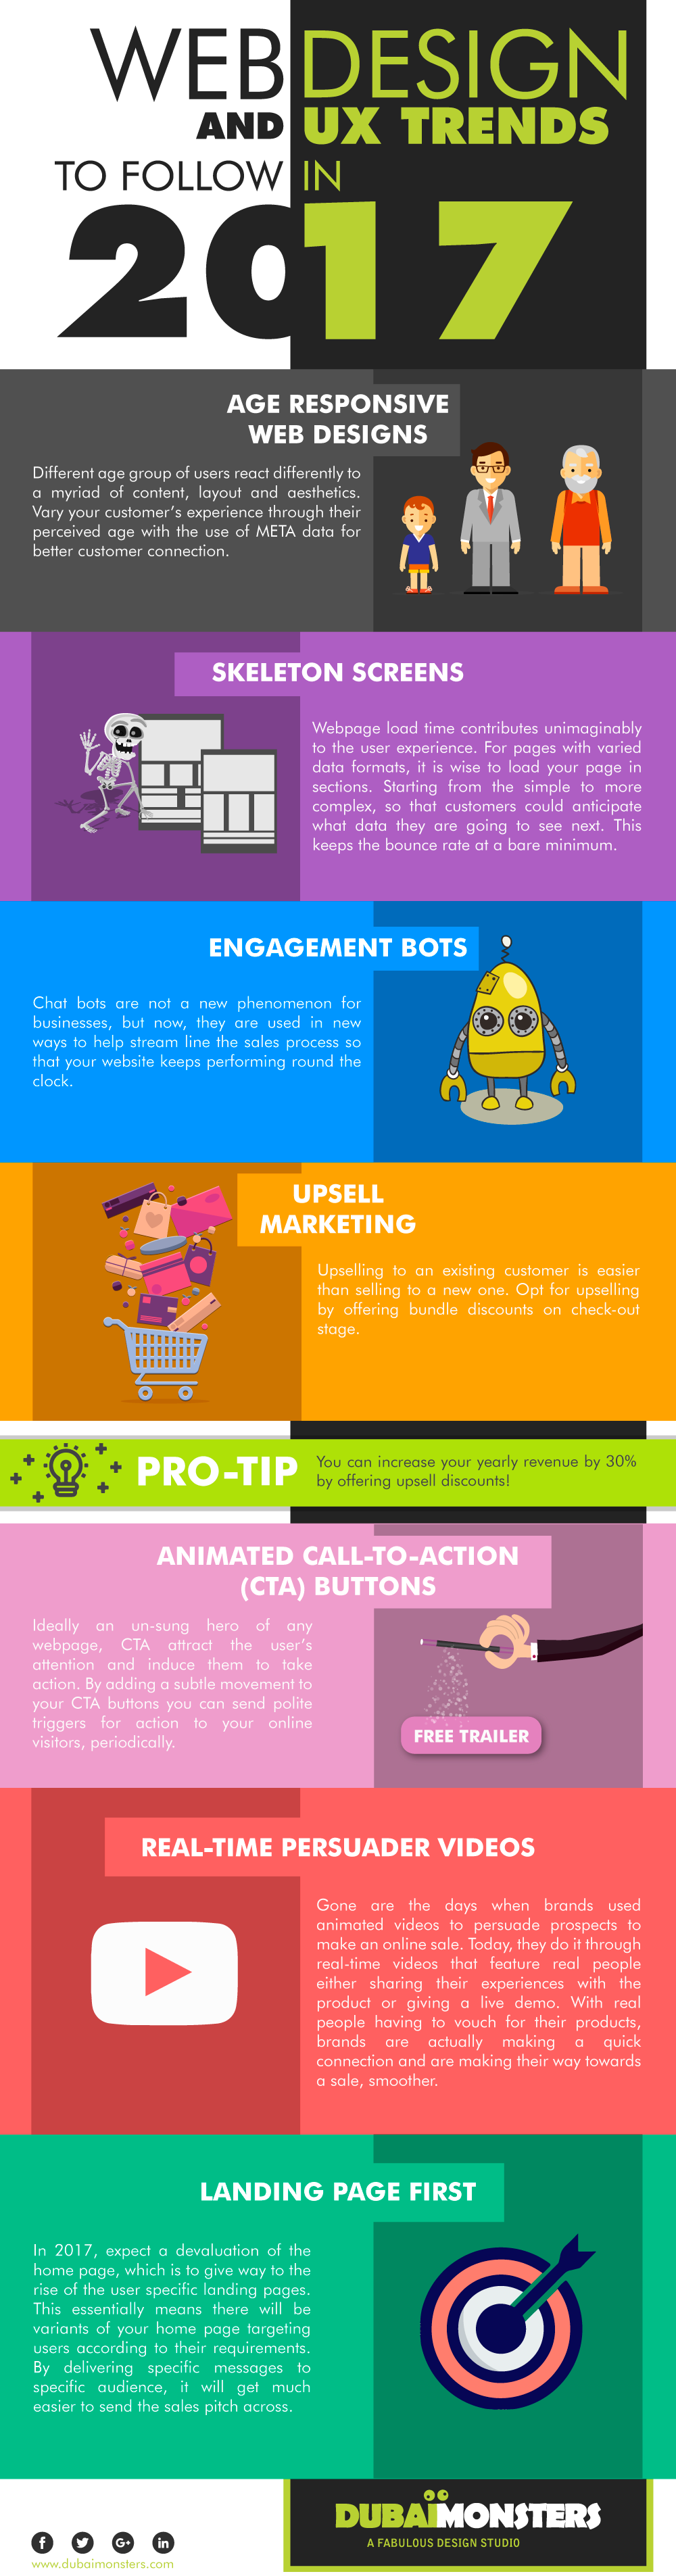 Web Design & UX Trends to Follow in 2017 - Infographics - Image 1